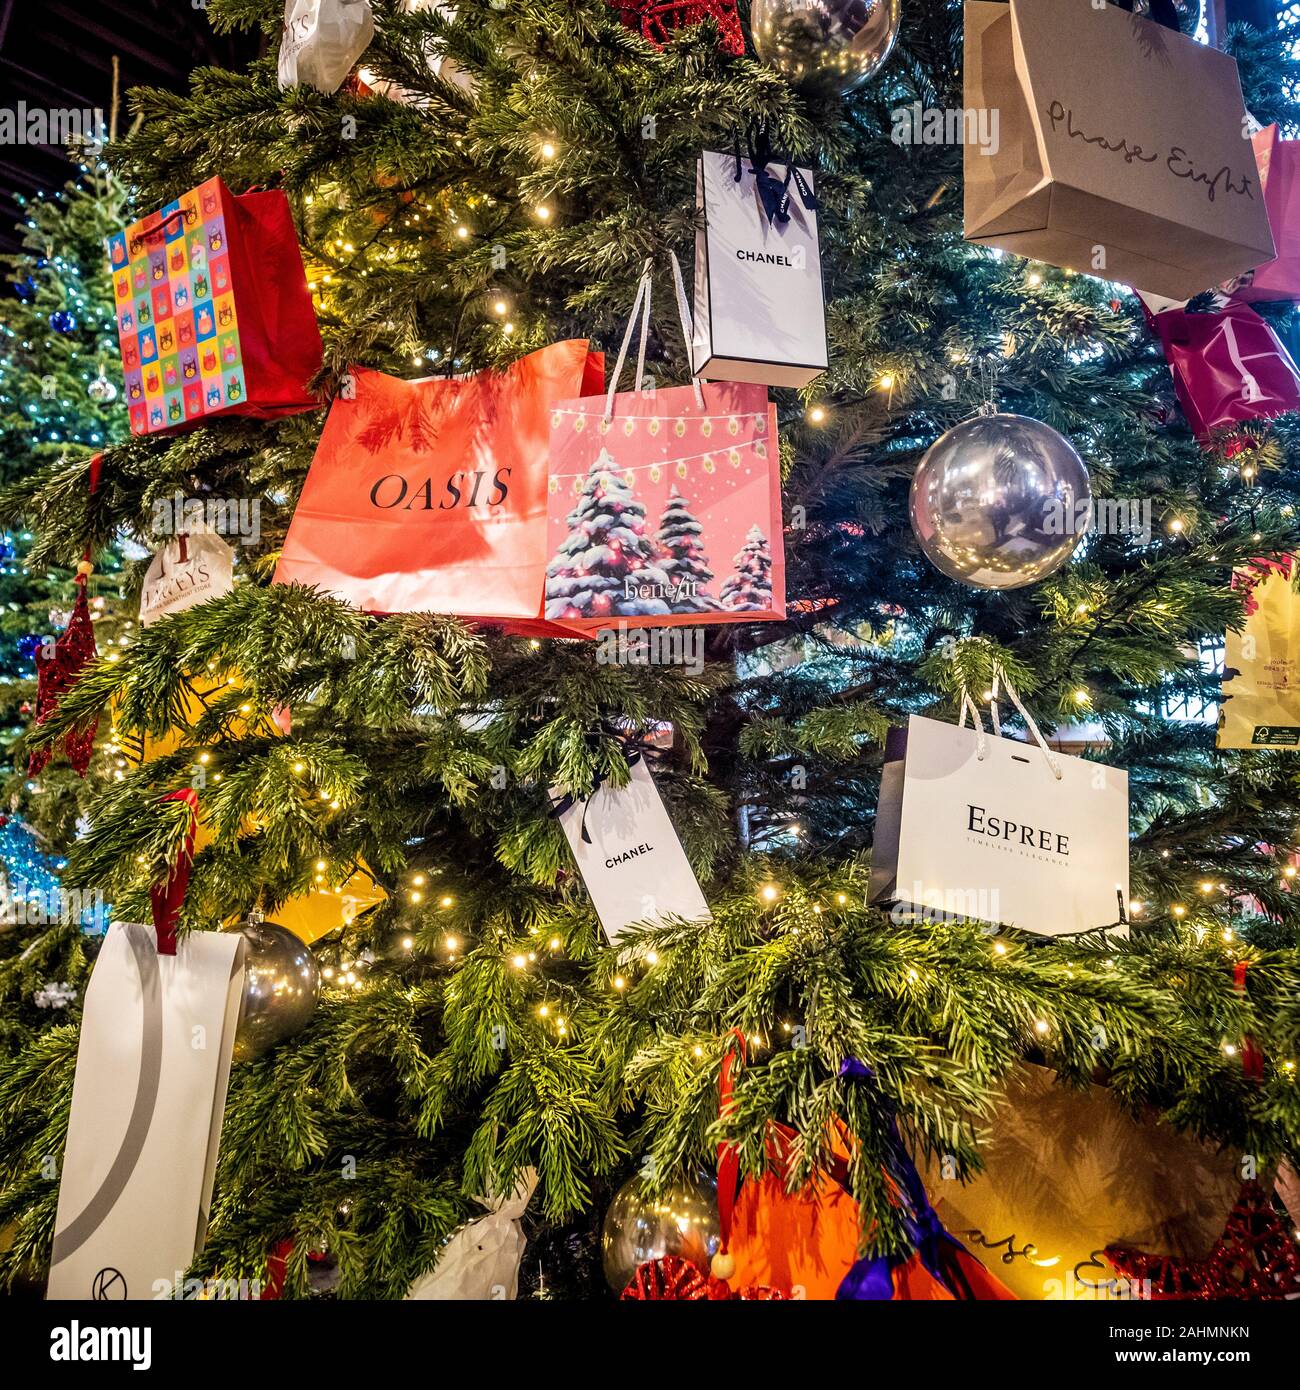 Shopping bags with designer brand names hung on Christmas tree. Stock Photo